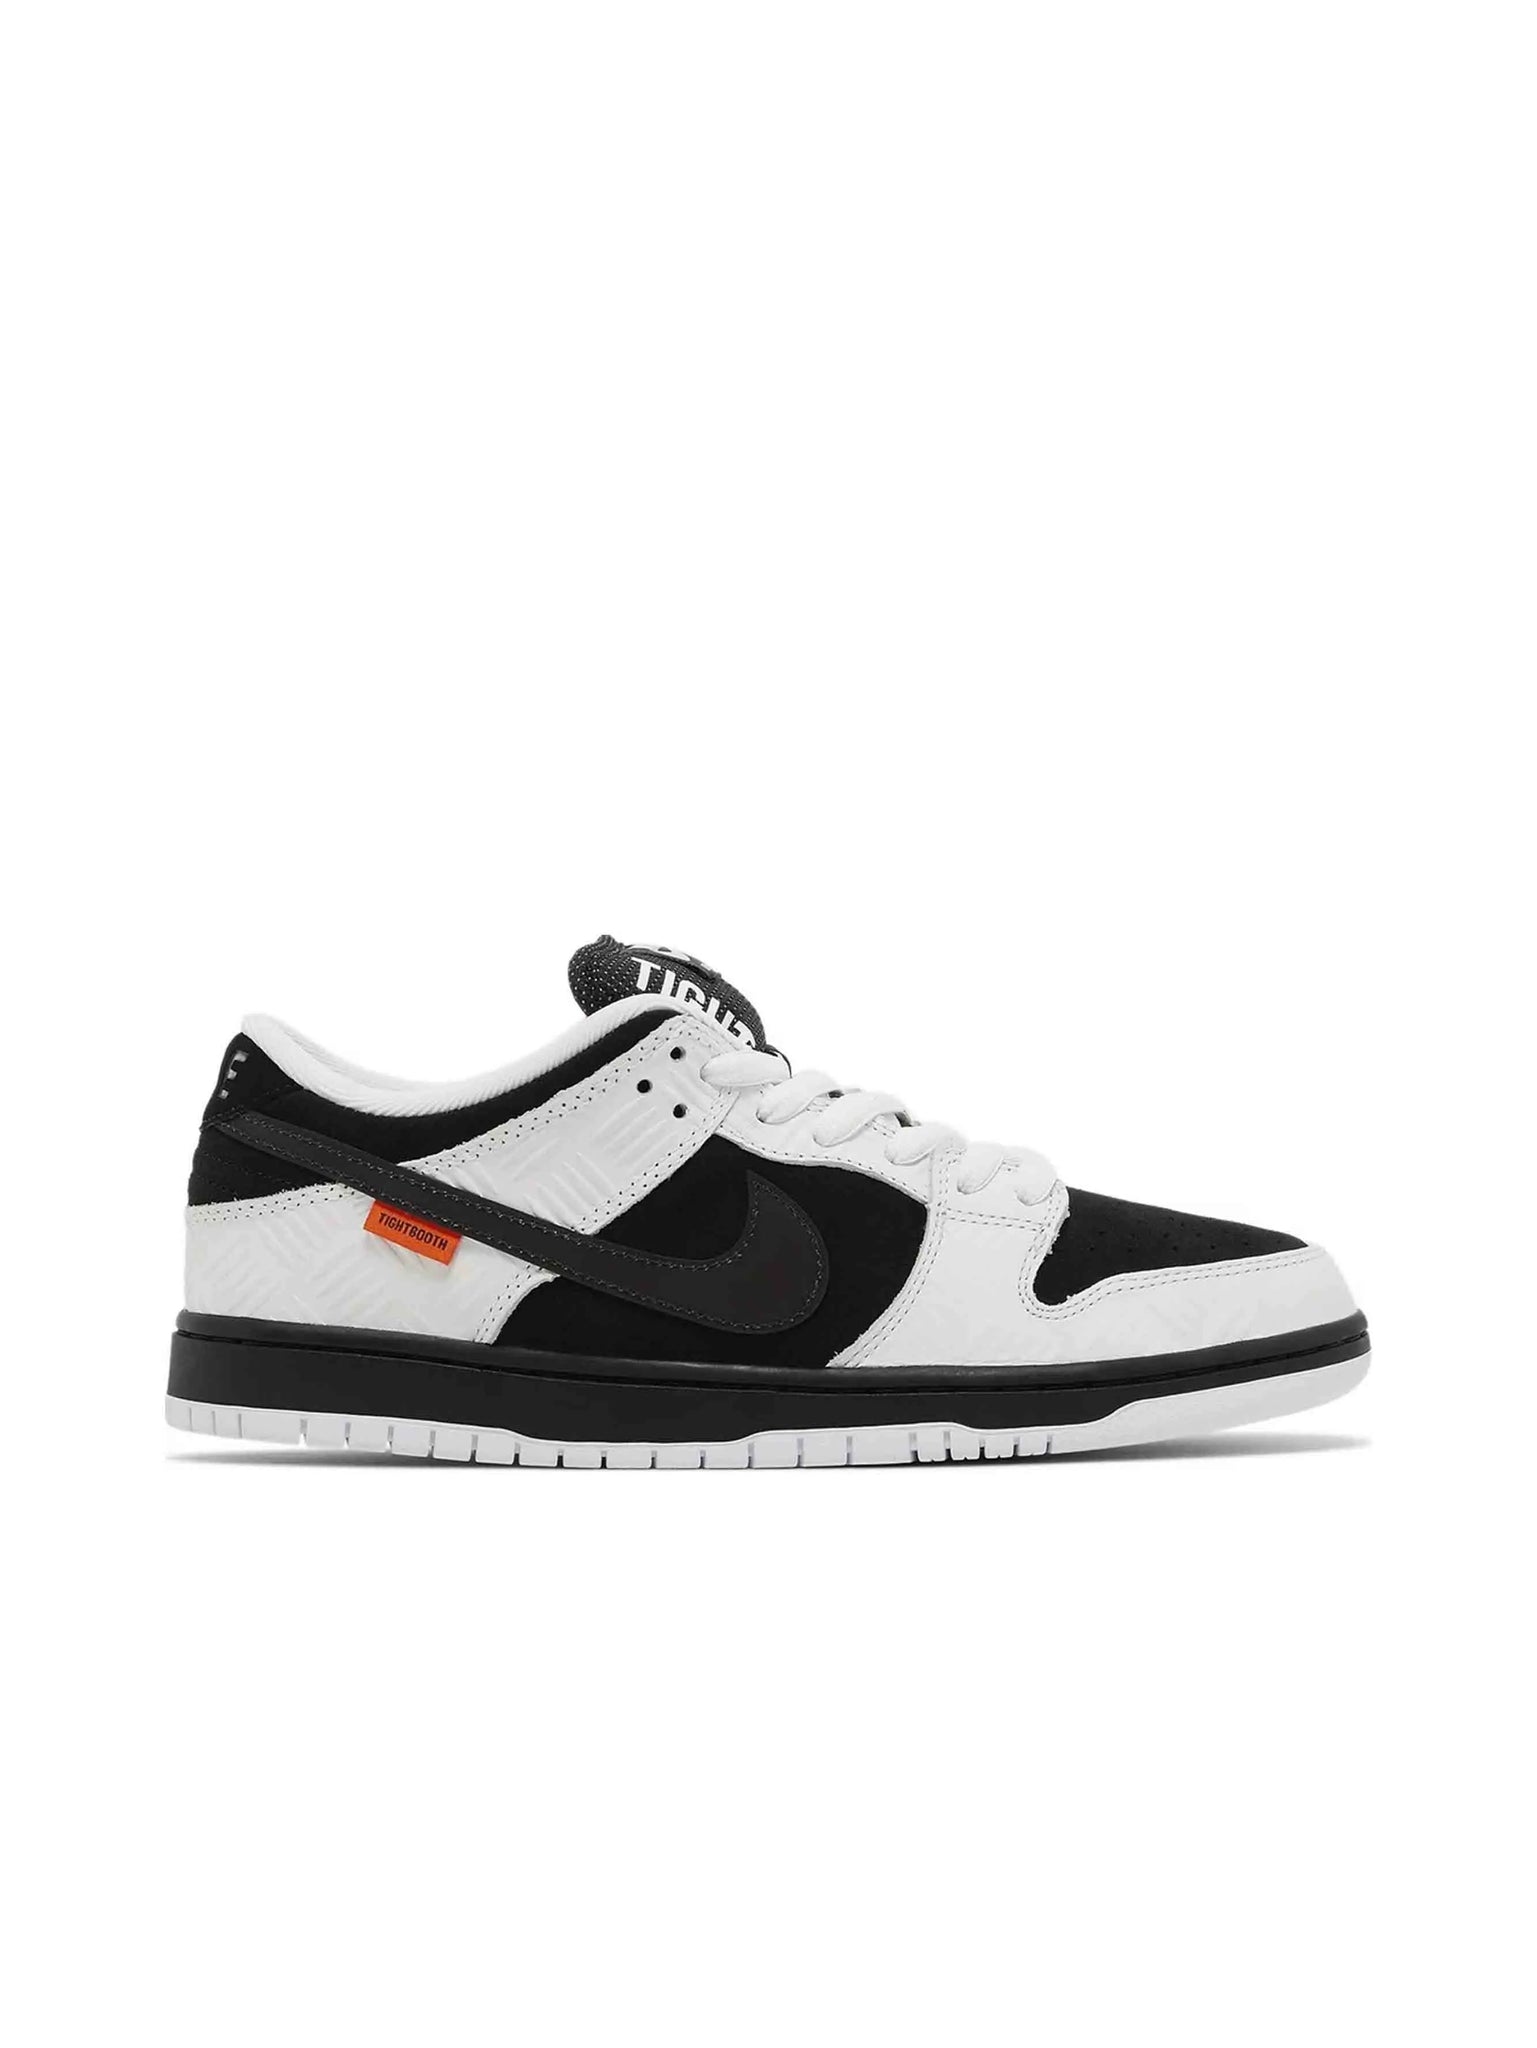 Nike SB Dunk Low TIGHTBOOTH in Auckland, New Zealand - Shop name